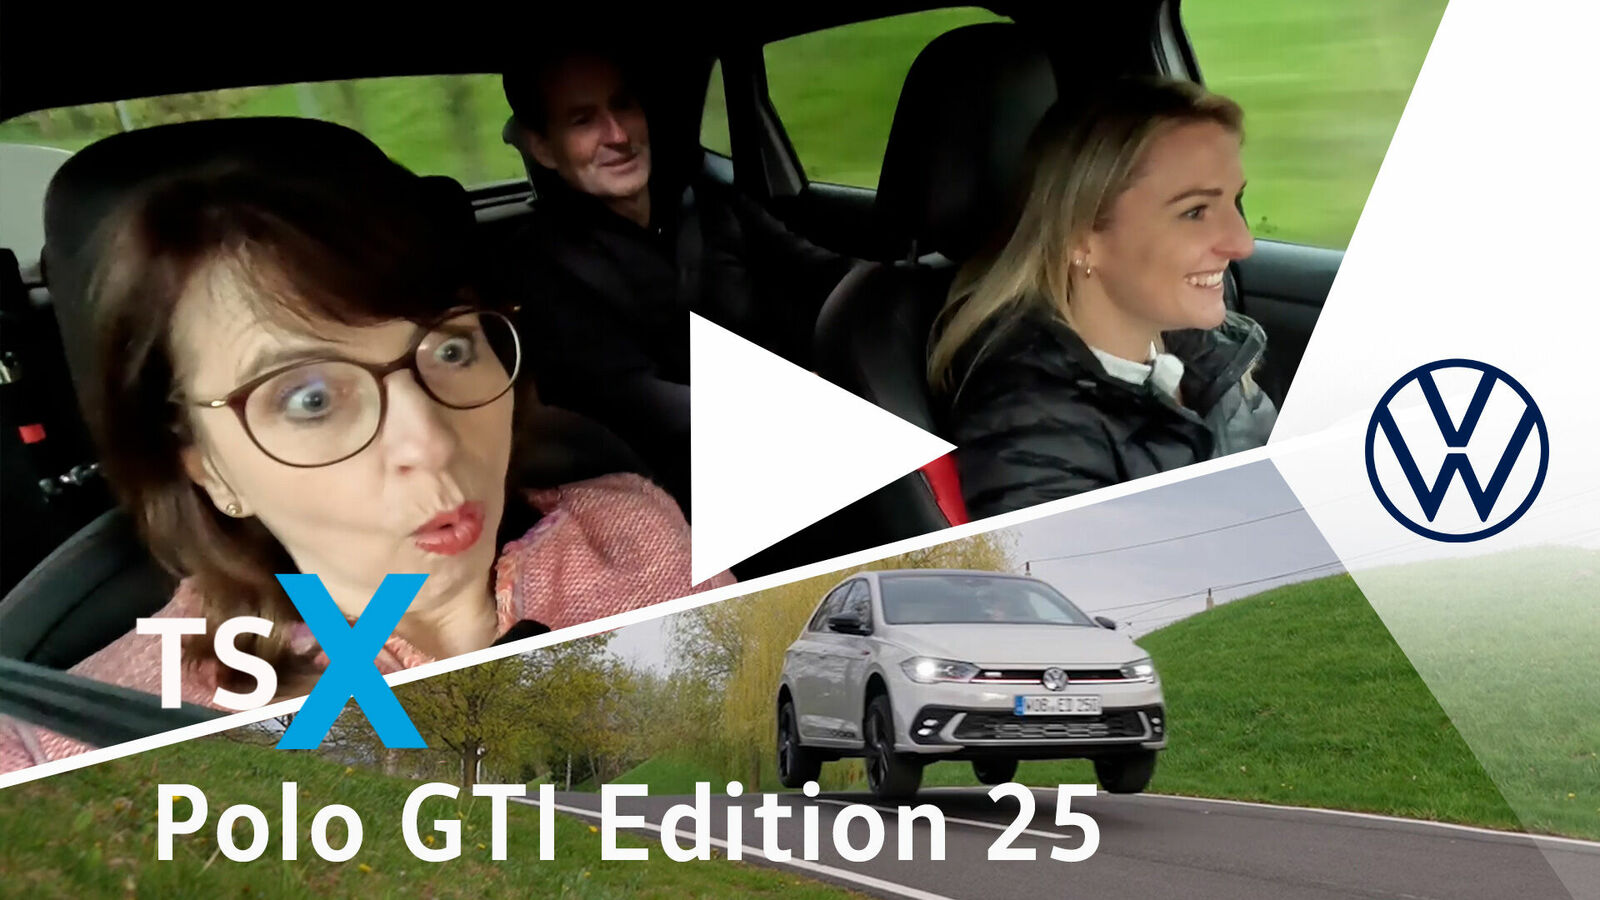 You Tube Video: Volkswagen limited-edition Polo GTI Edition 25